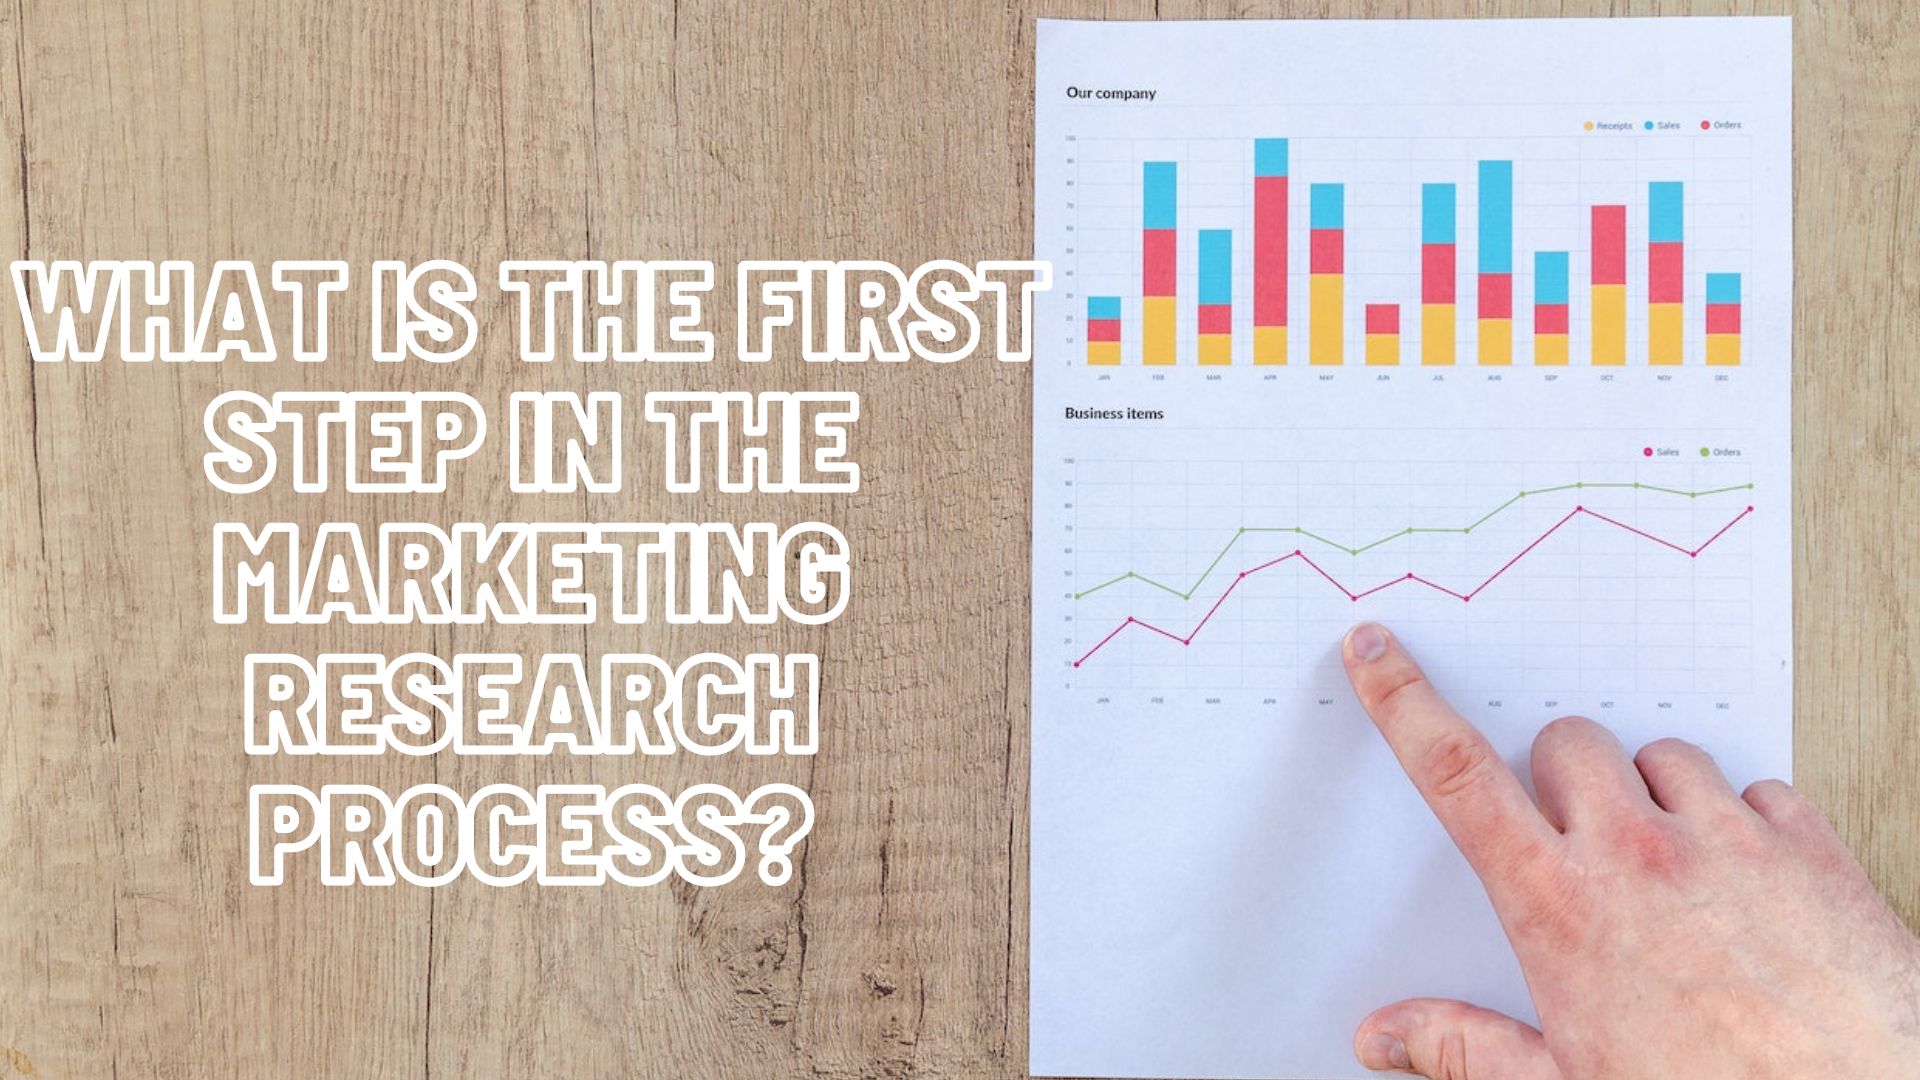 What Is The First Step In The Marketing Research Process?